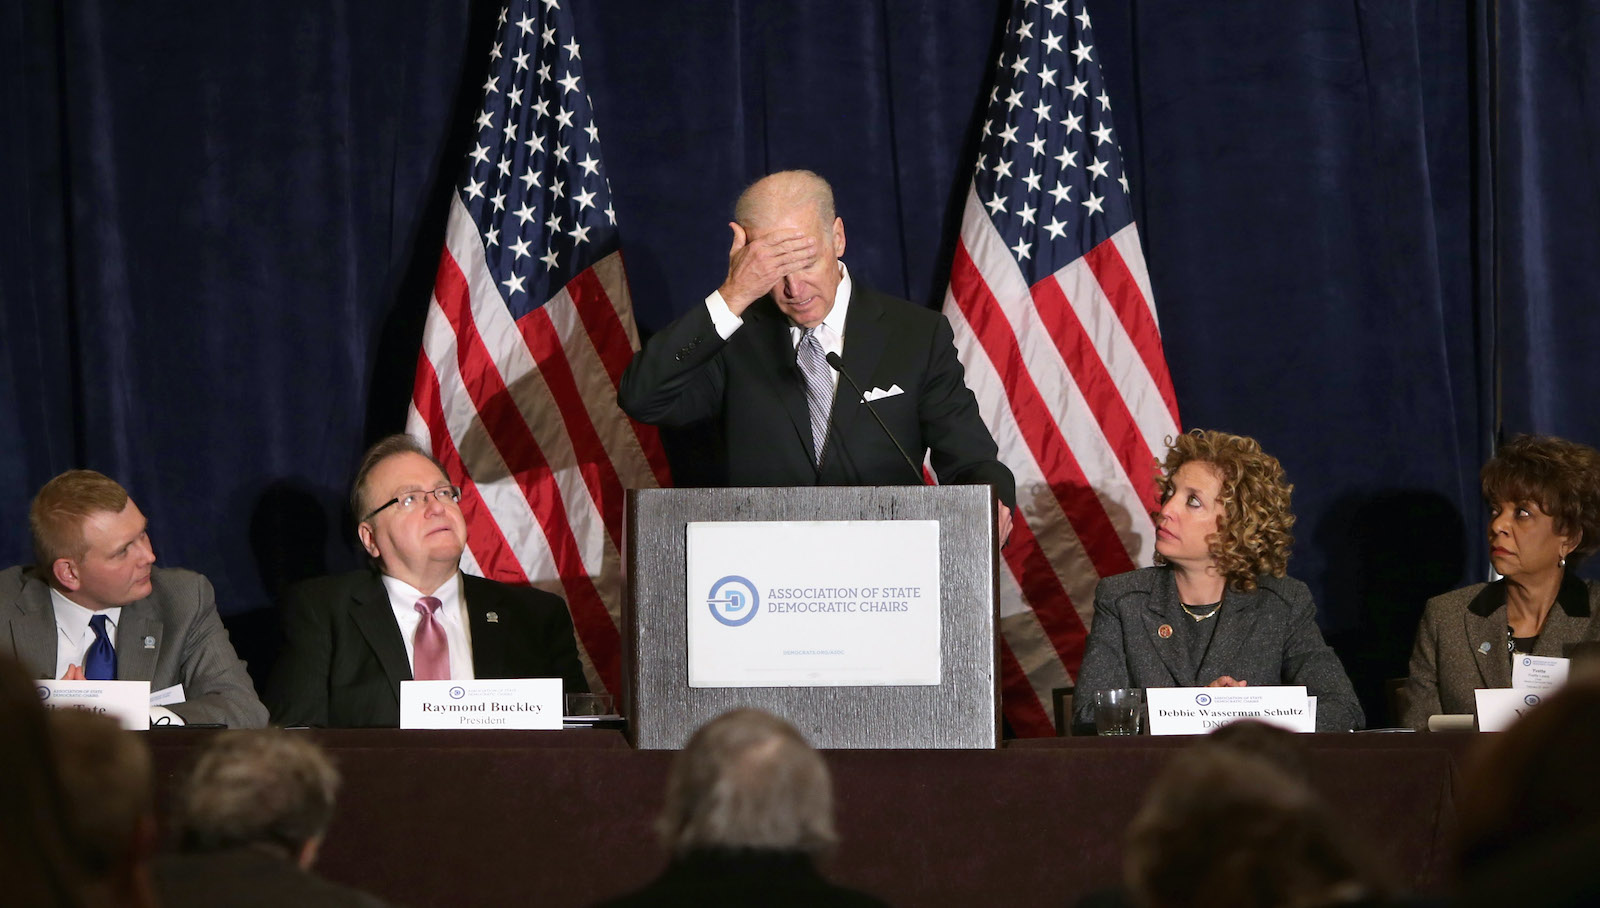 U.S. Vice President Joe Biden delivers remarks during the Democratic National Committee's Winter Meeting at the Capitol Hilton February 27, 2014 in Washington, DC. Biden addressed the Association of State Democratic Chairs.